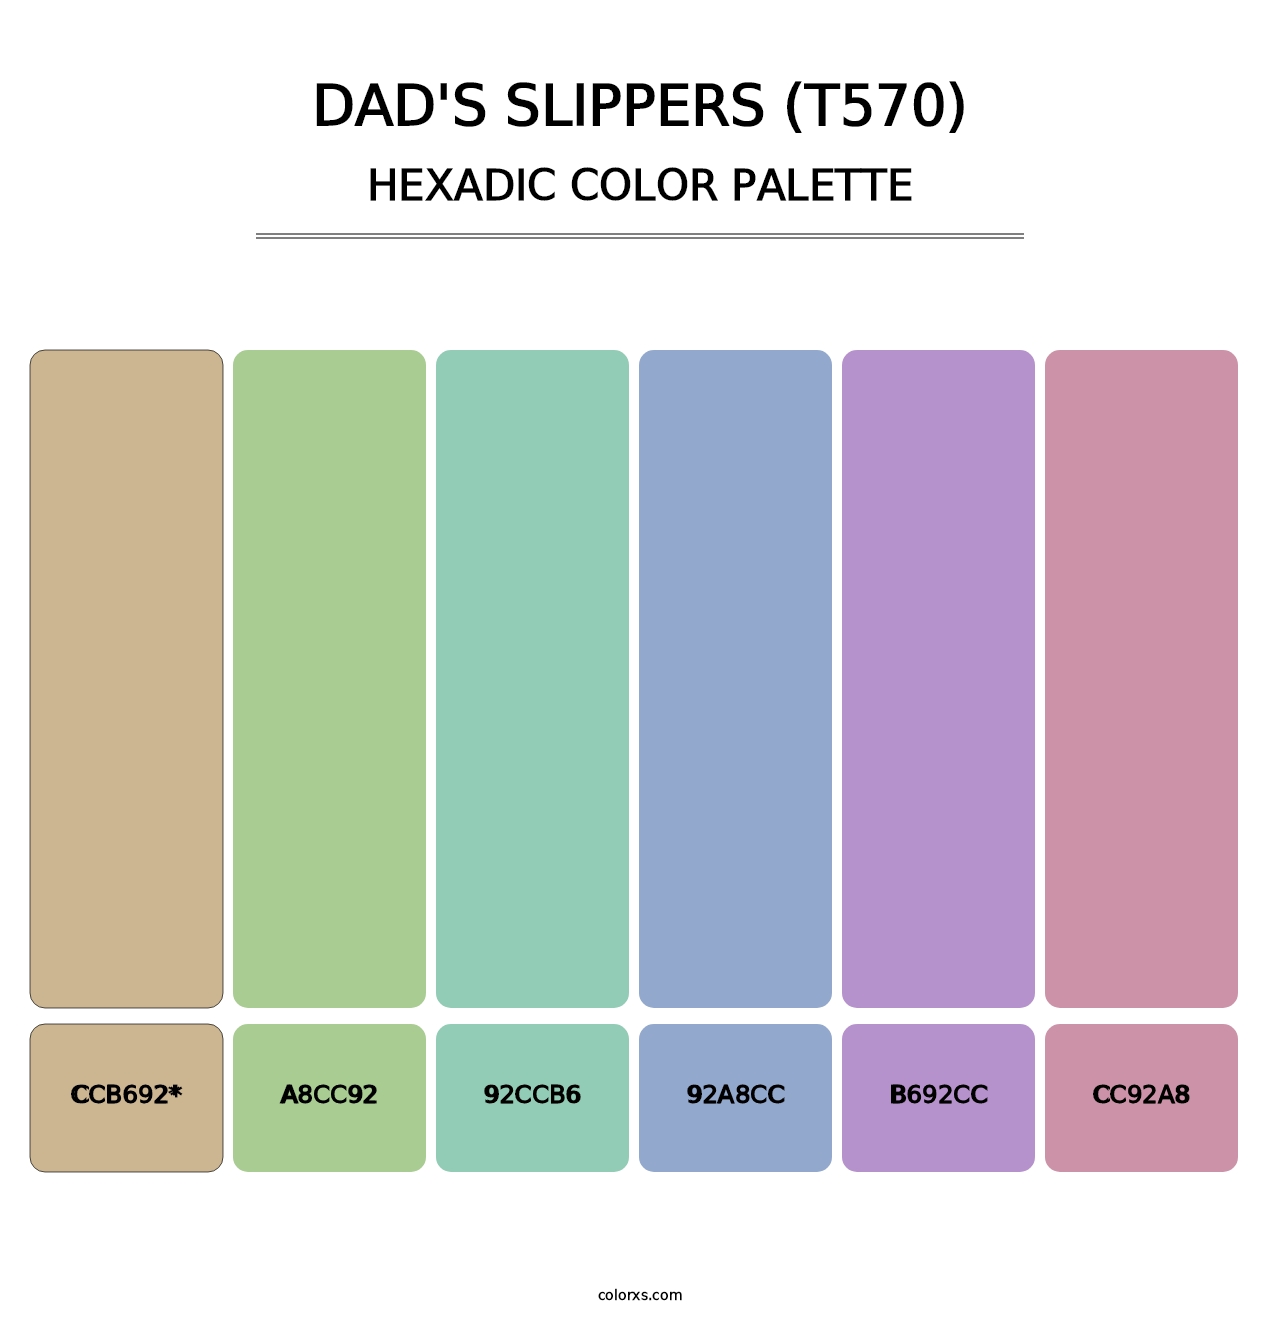 Dad's Slippers (T570) - Hexadic Color Palette